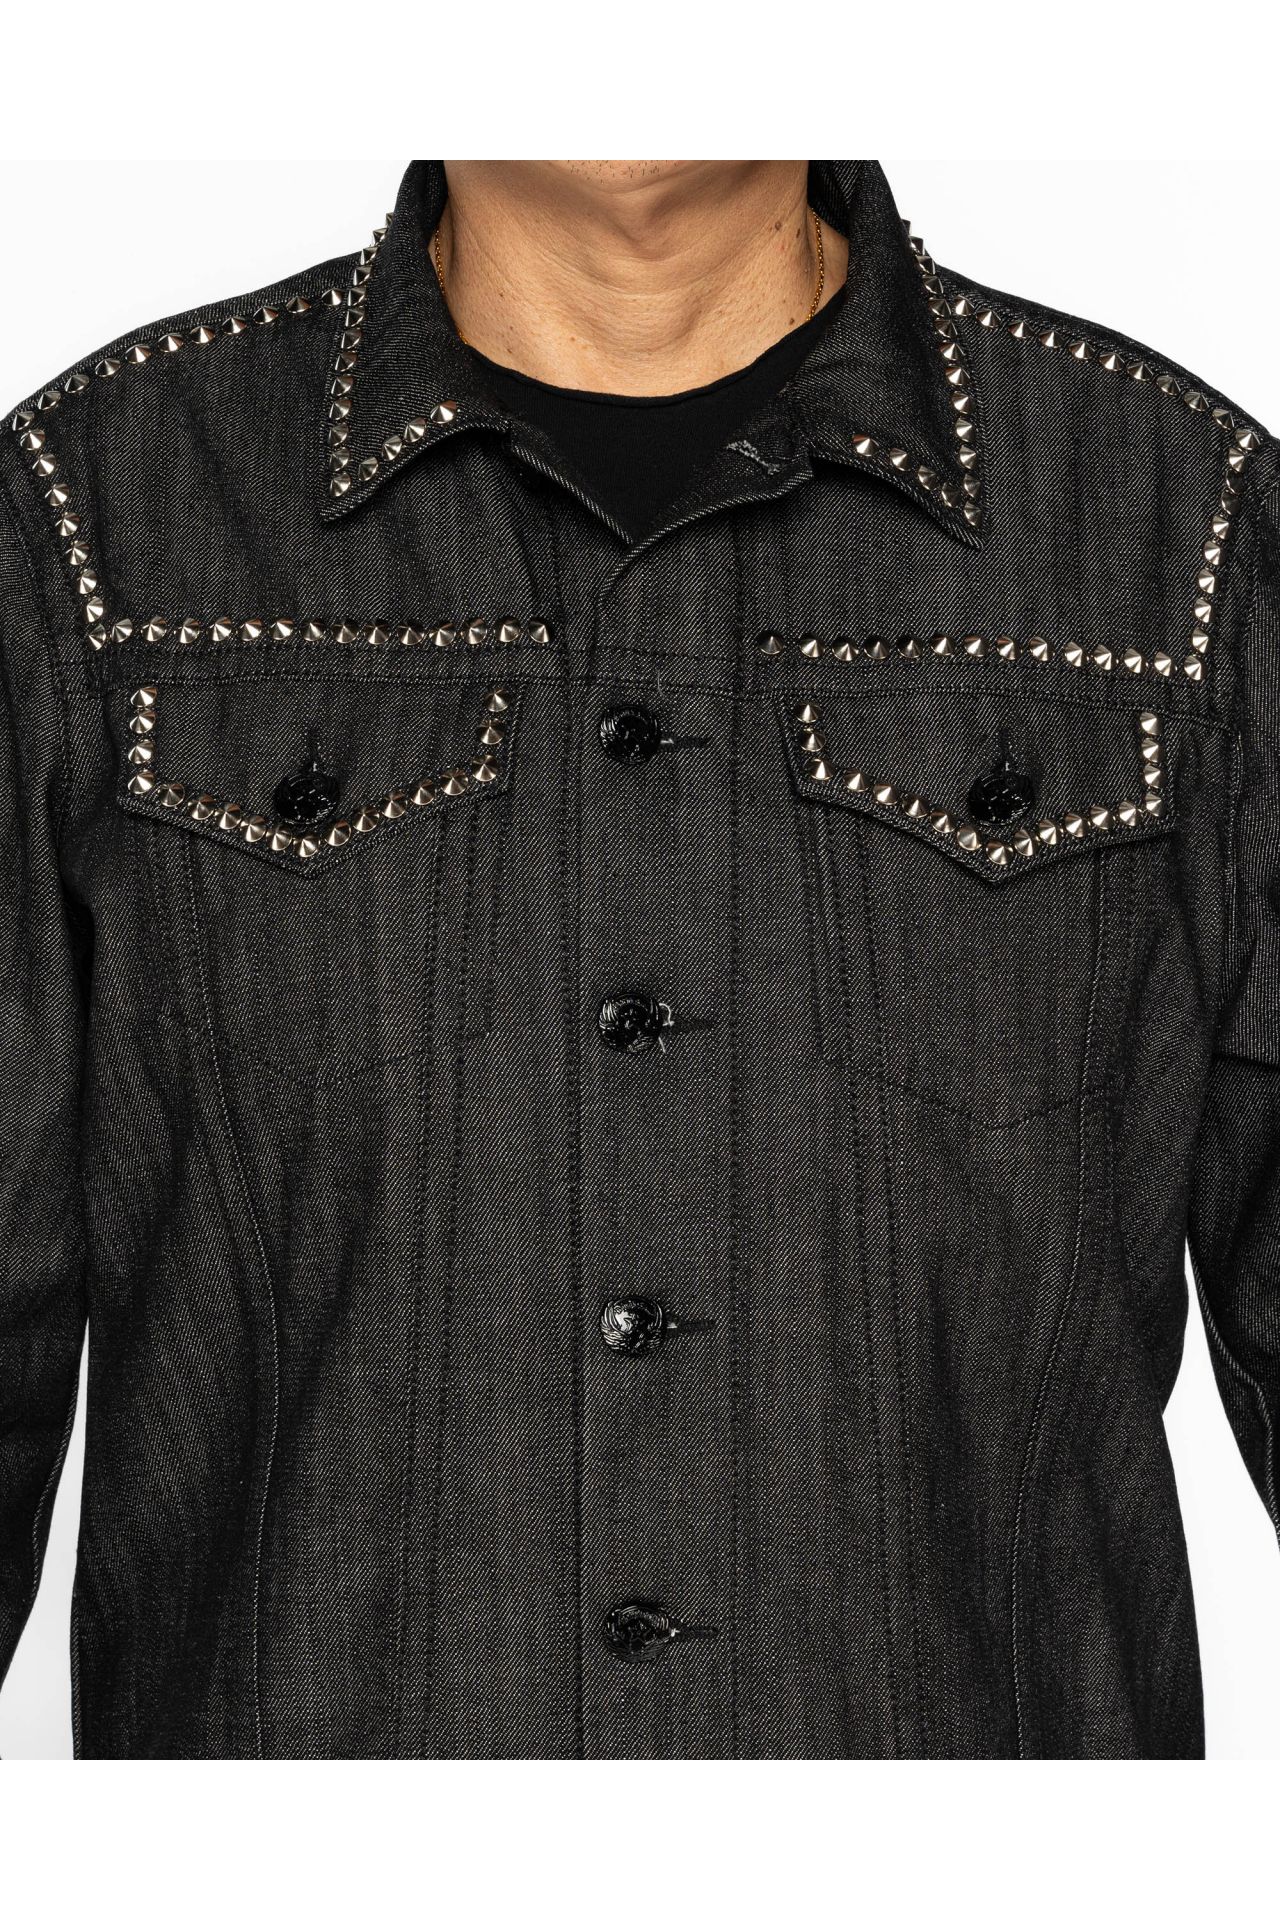 ROBINS RAW DENIM COLLECTION MENS JACKET IN RAW BLACK DENIM WITH PATCHES AND  CRYSTALS